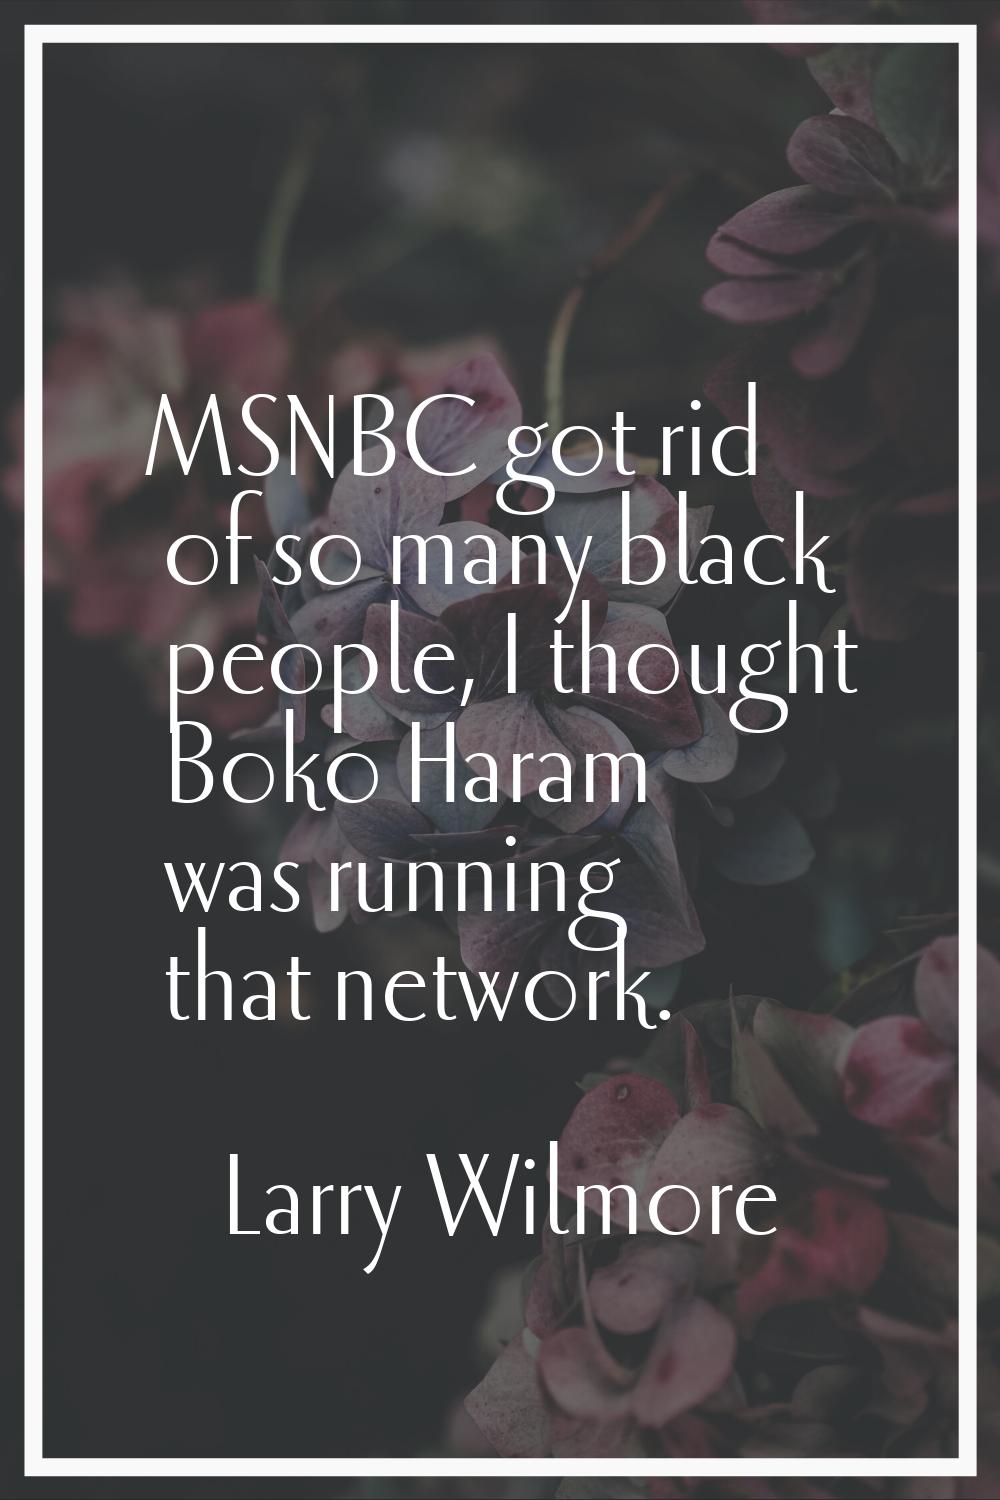 MSNBC got rid of so many black people, I thought Boko Haram was running that network.